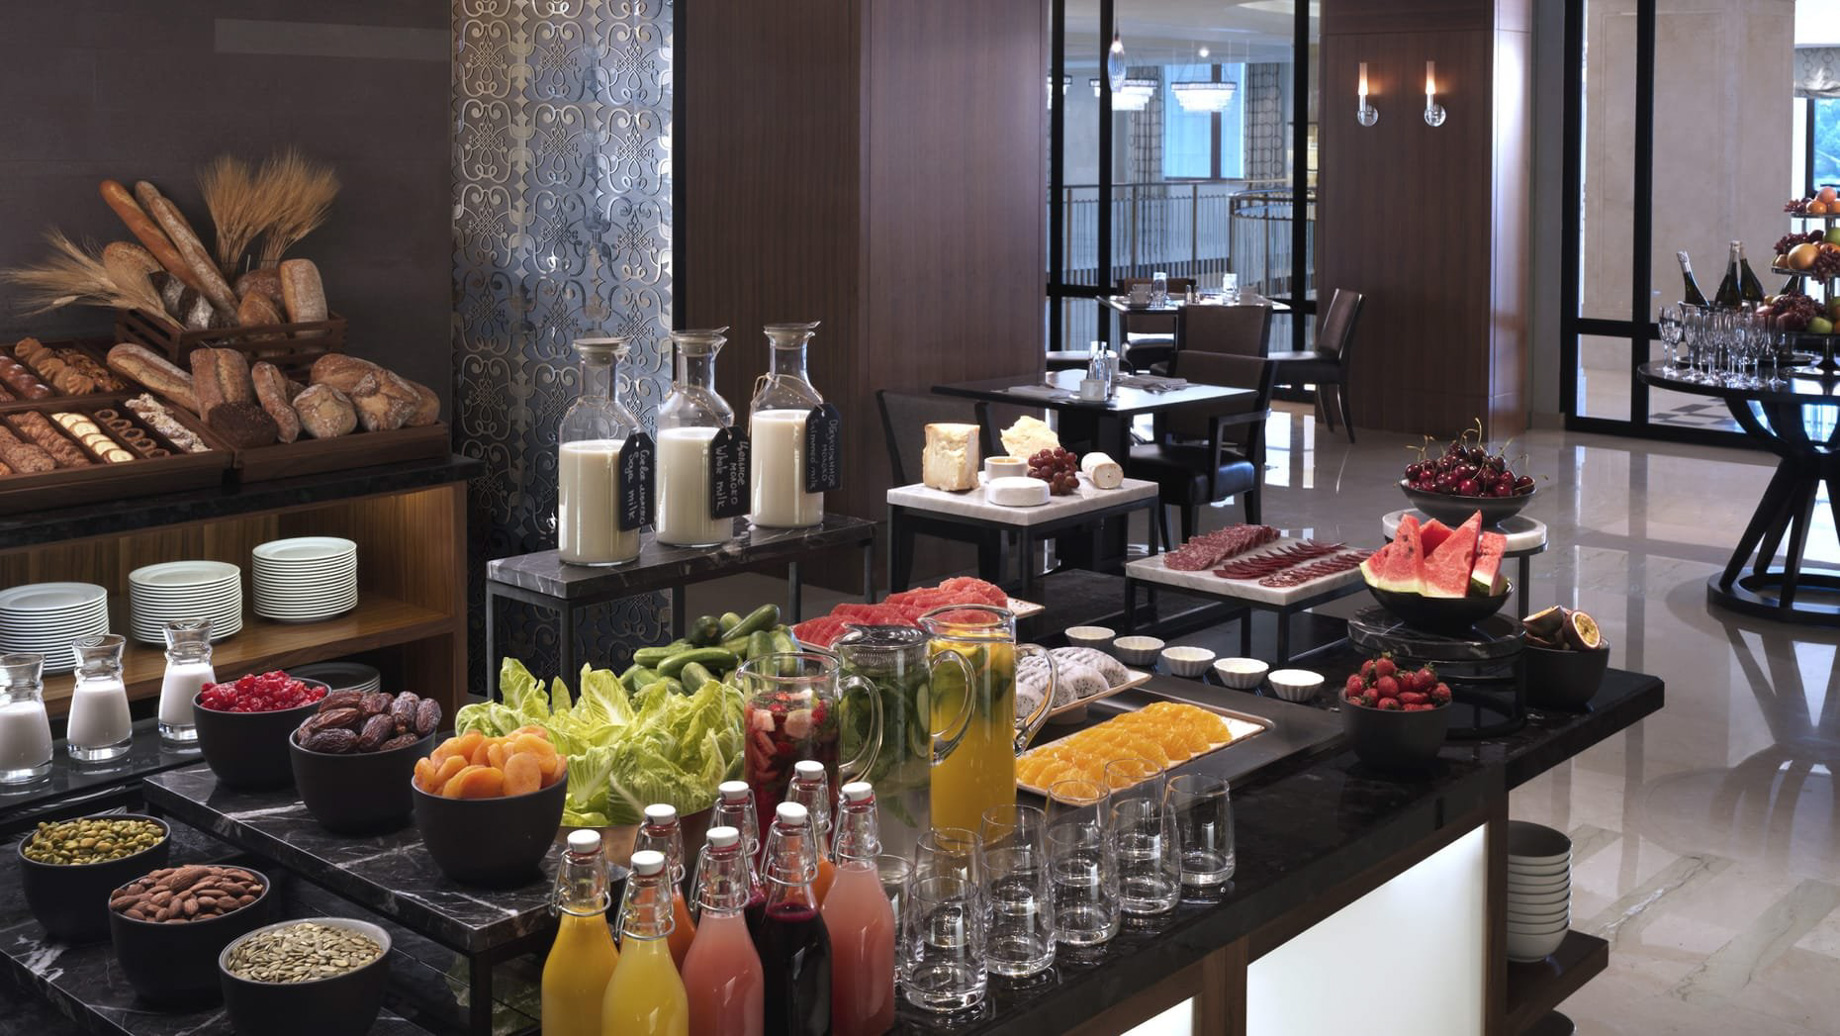 Four Seasons Hotel Moscow - Moscow, Russia - Bystro Restaurant Breakfast Buffet